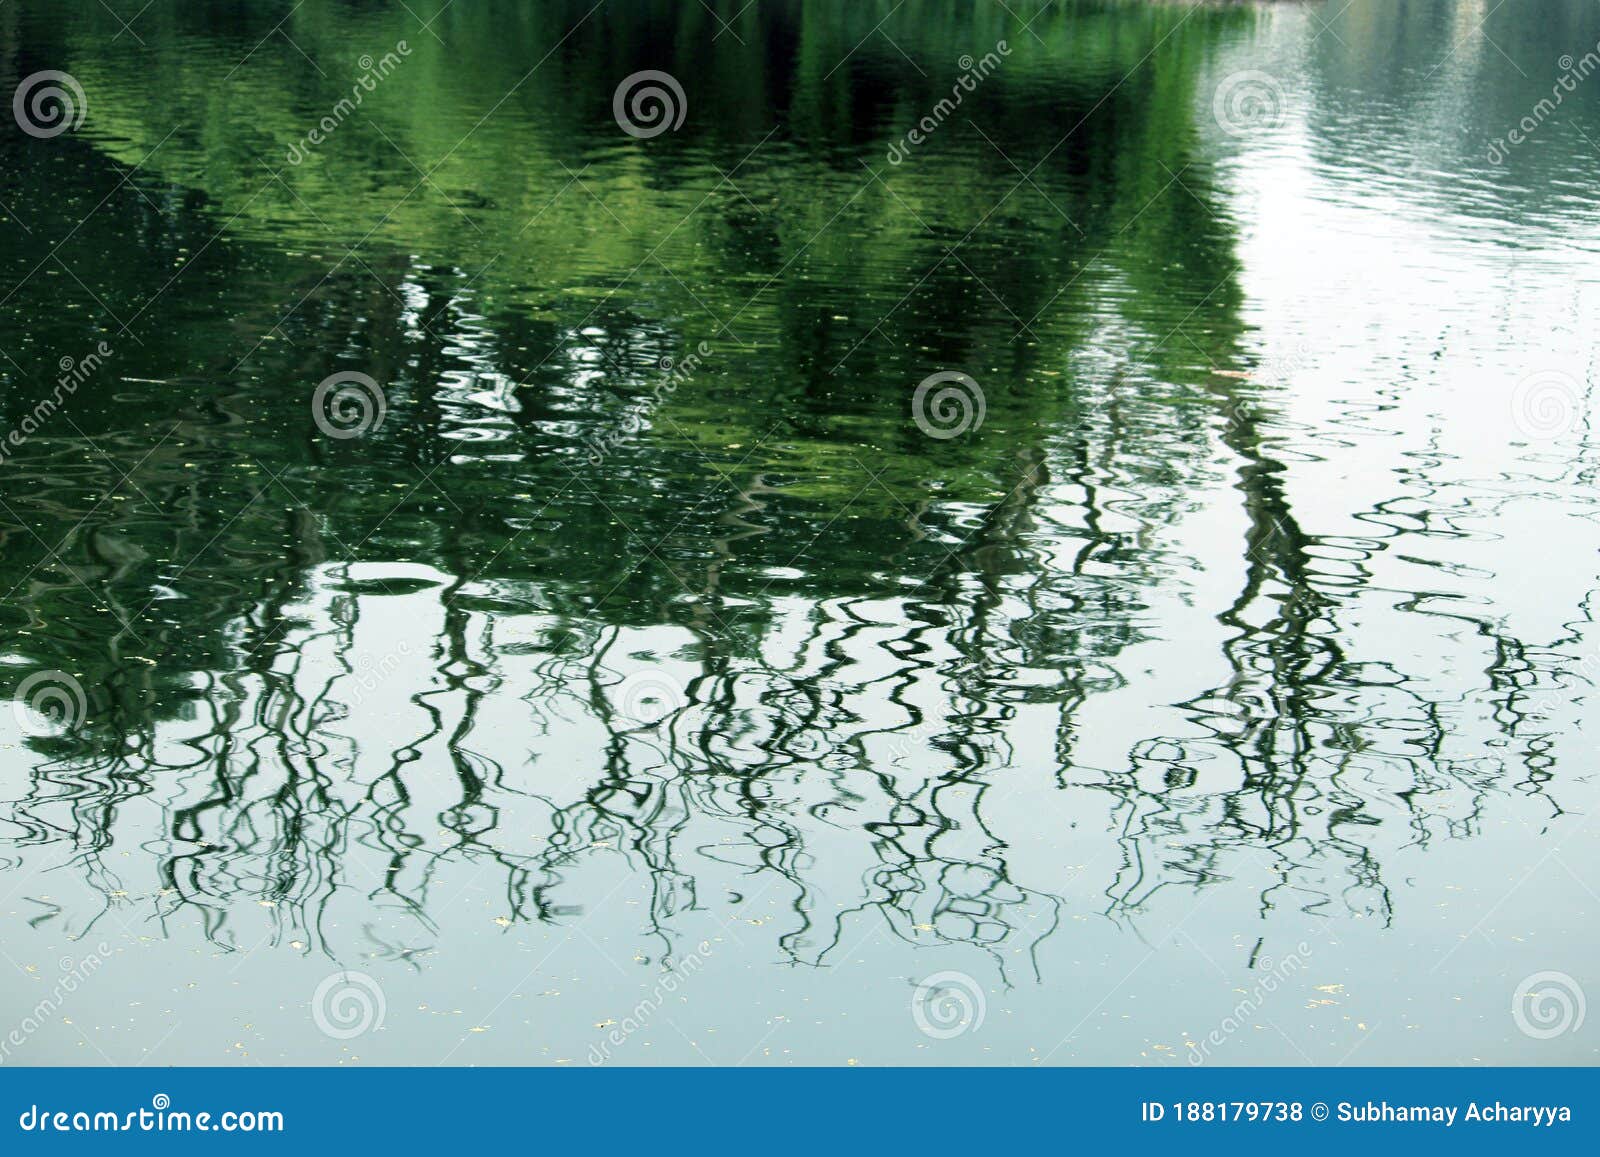 Beautiful Water Reflection Of Green Tree On Water And Water Ripple